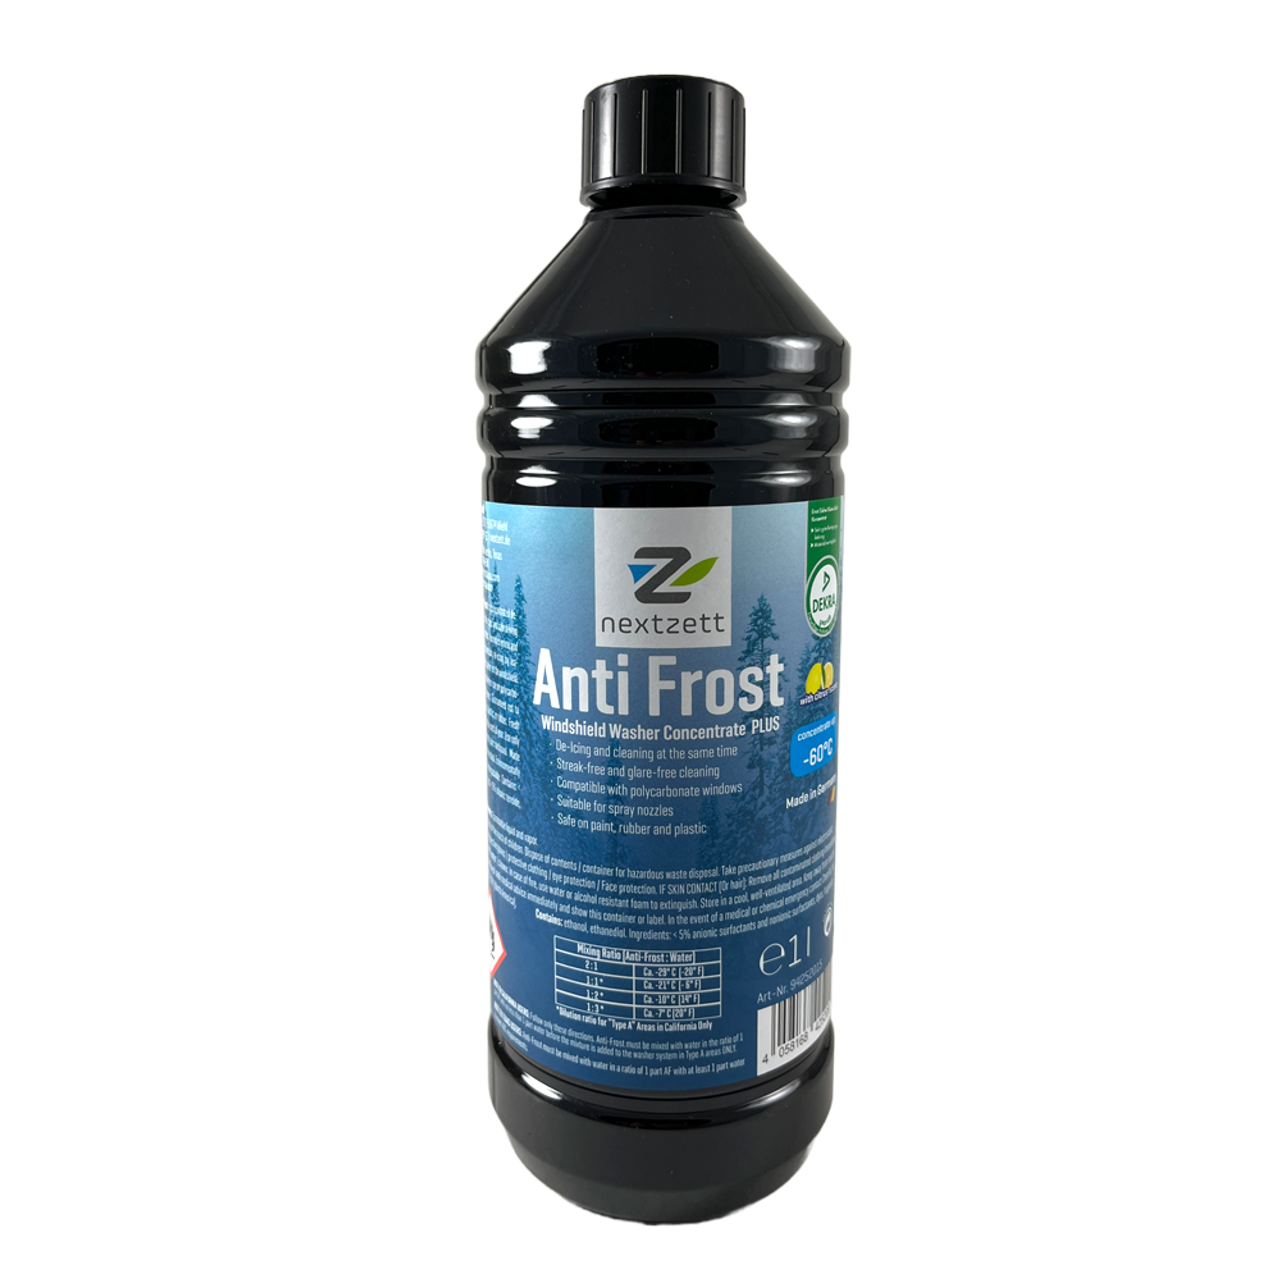 Anti Frost Concentrated Winter Washer Fluid 33.8 fl oz (1L) - Methanol-free